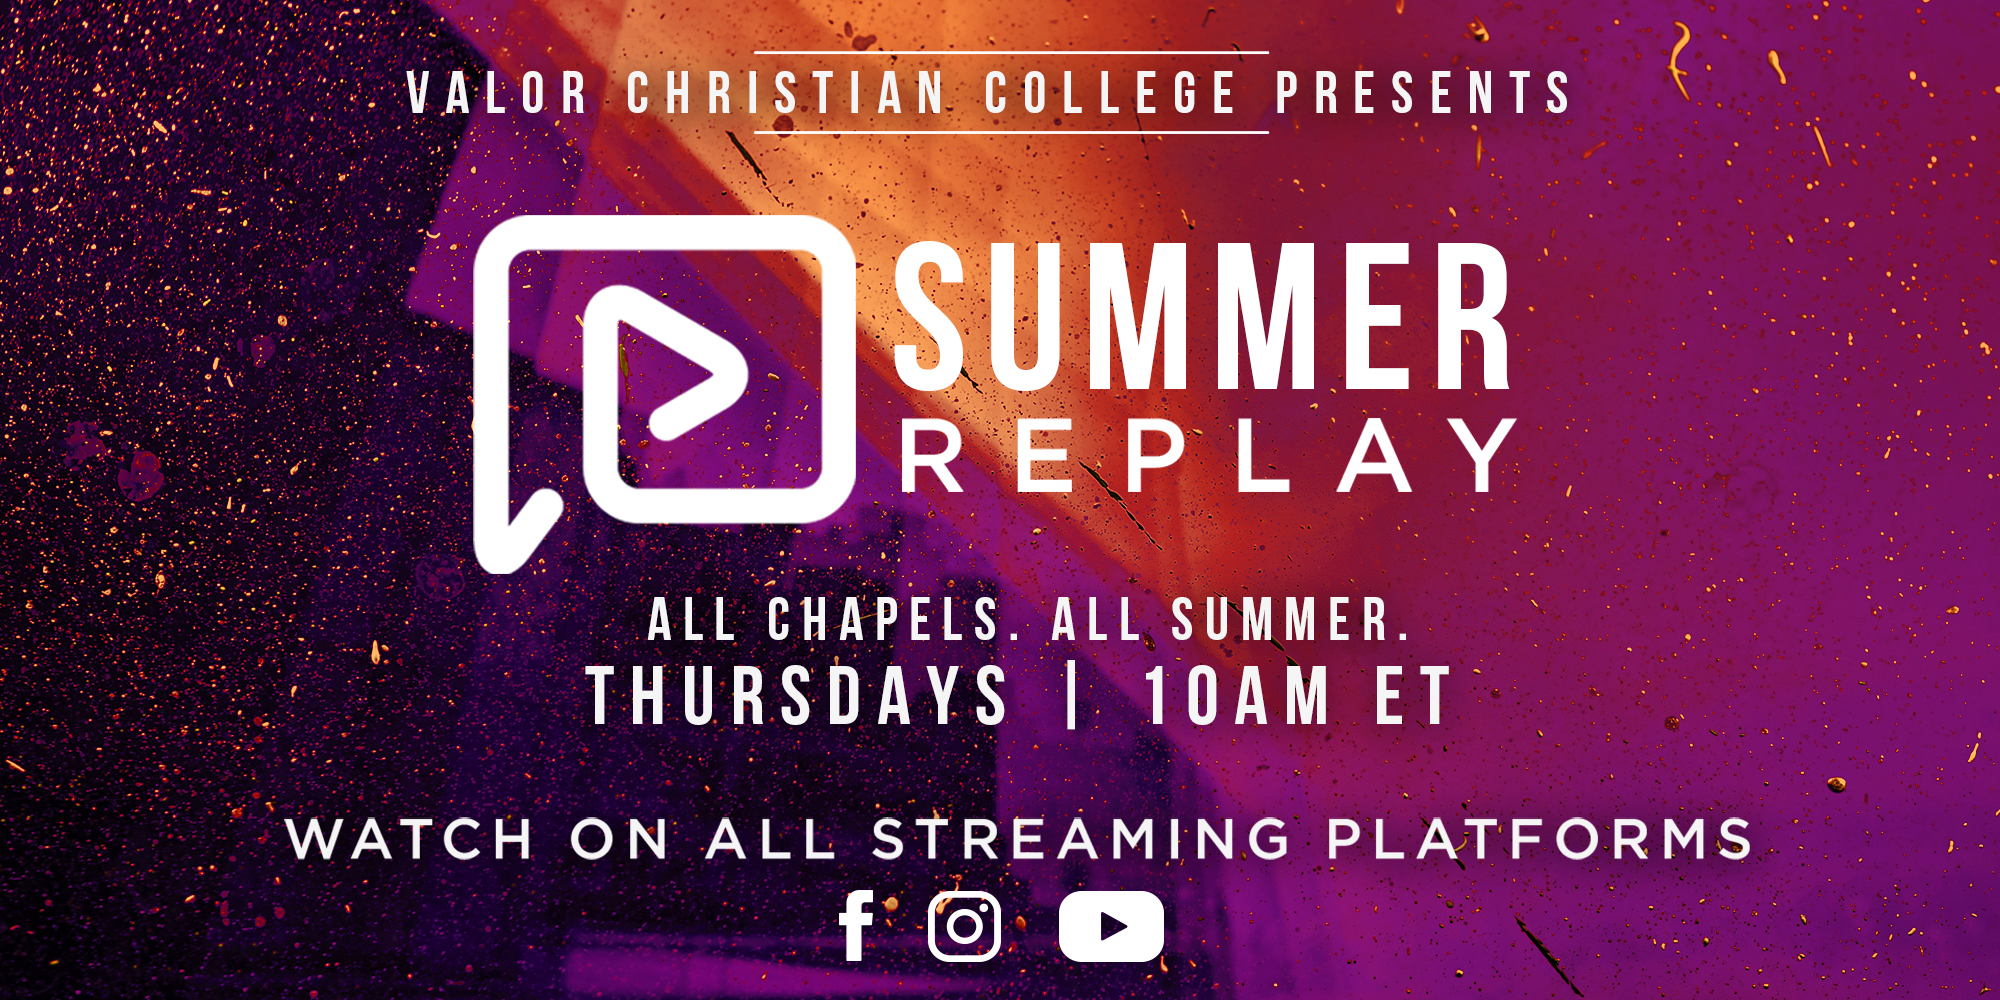 Valor Christian College Presents Summer Replay All Chapels All Summer Thursdays 10am Et Watch on All Streaming Platforms Facebook Instagram Youtube